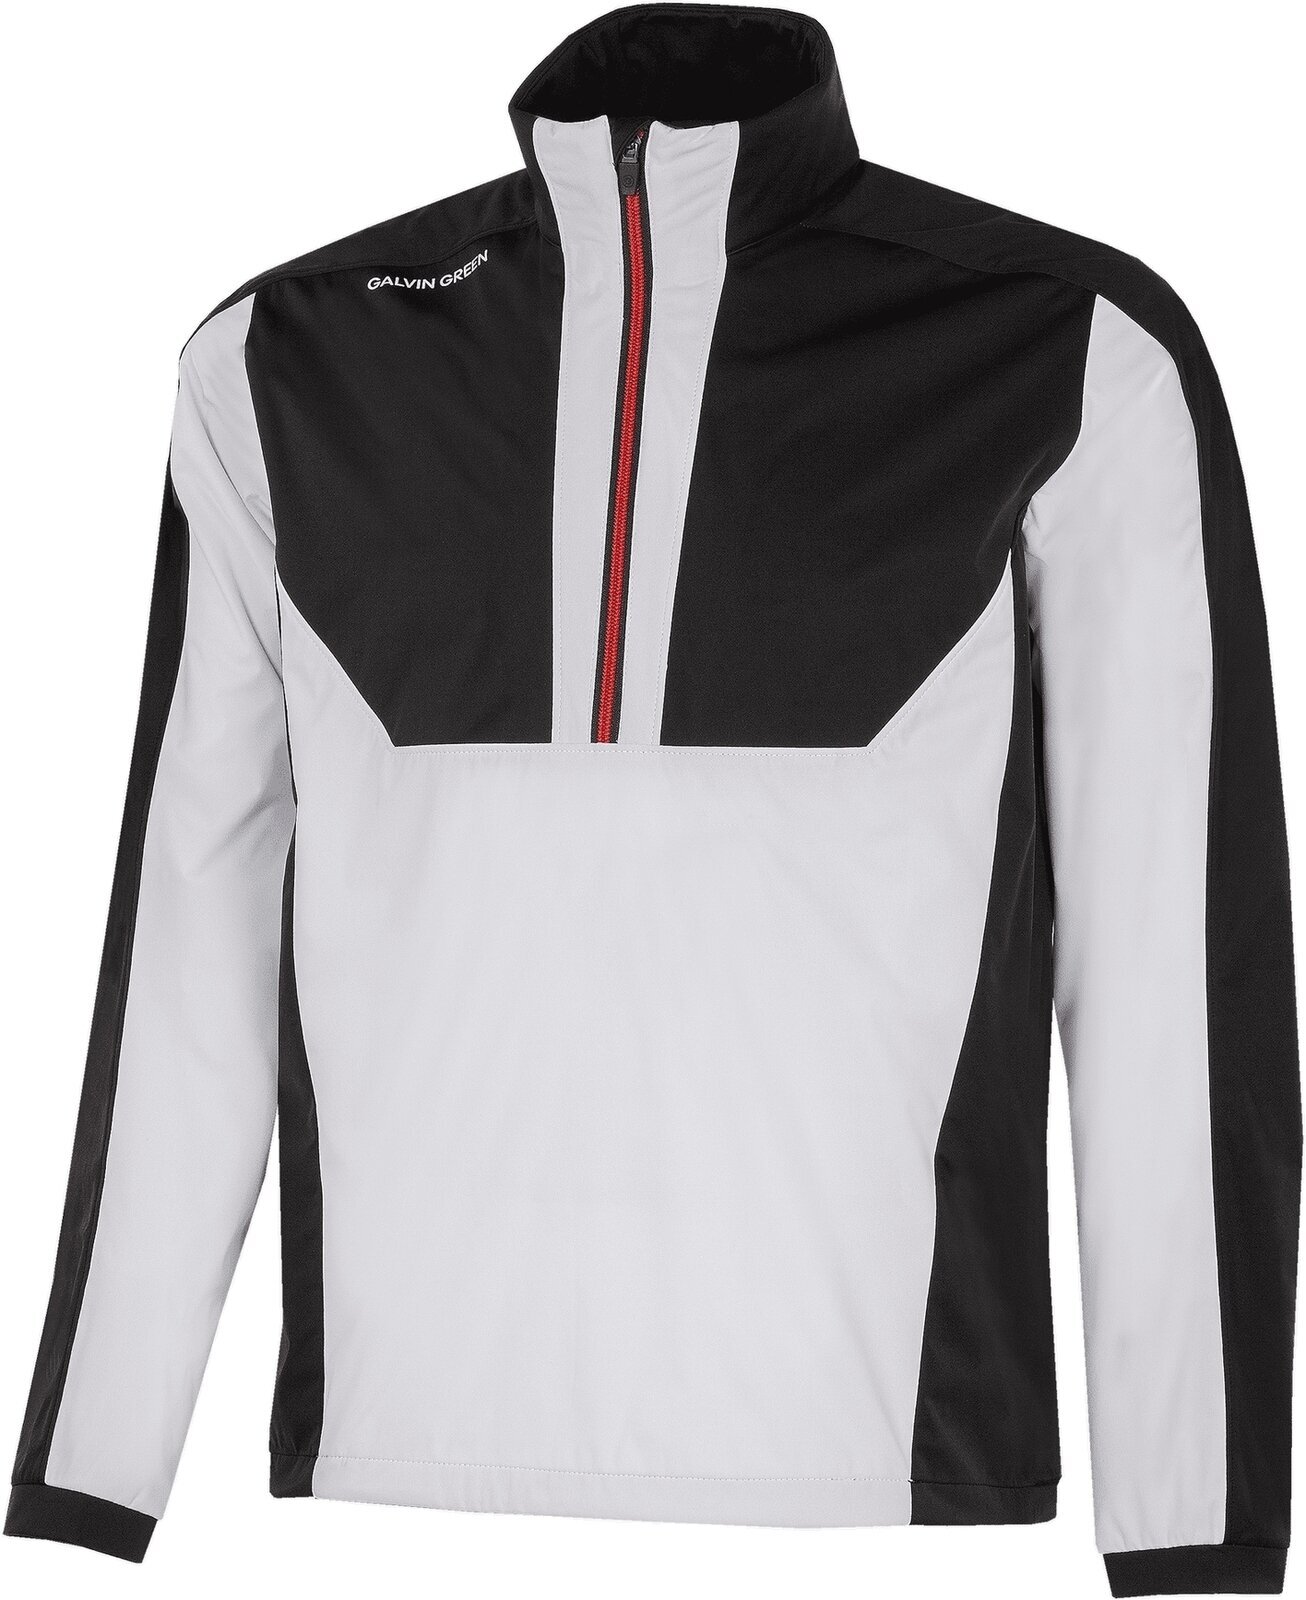 Jacket Galvin Green Lawrence Mens Windproof And Water Repellent Jacket White/Black/Red XL